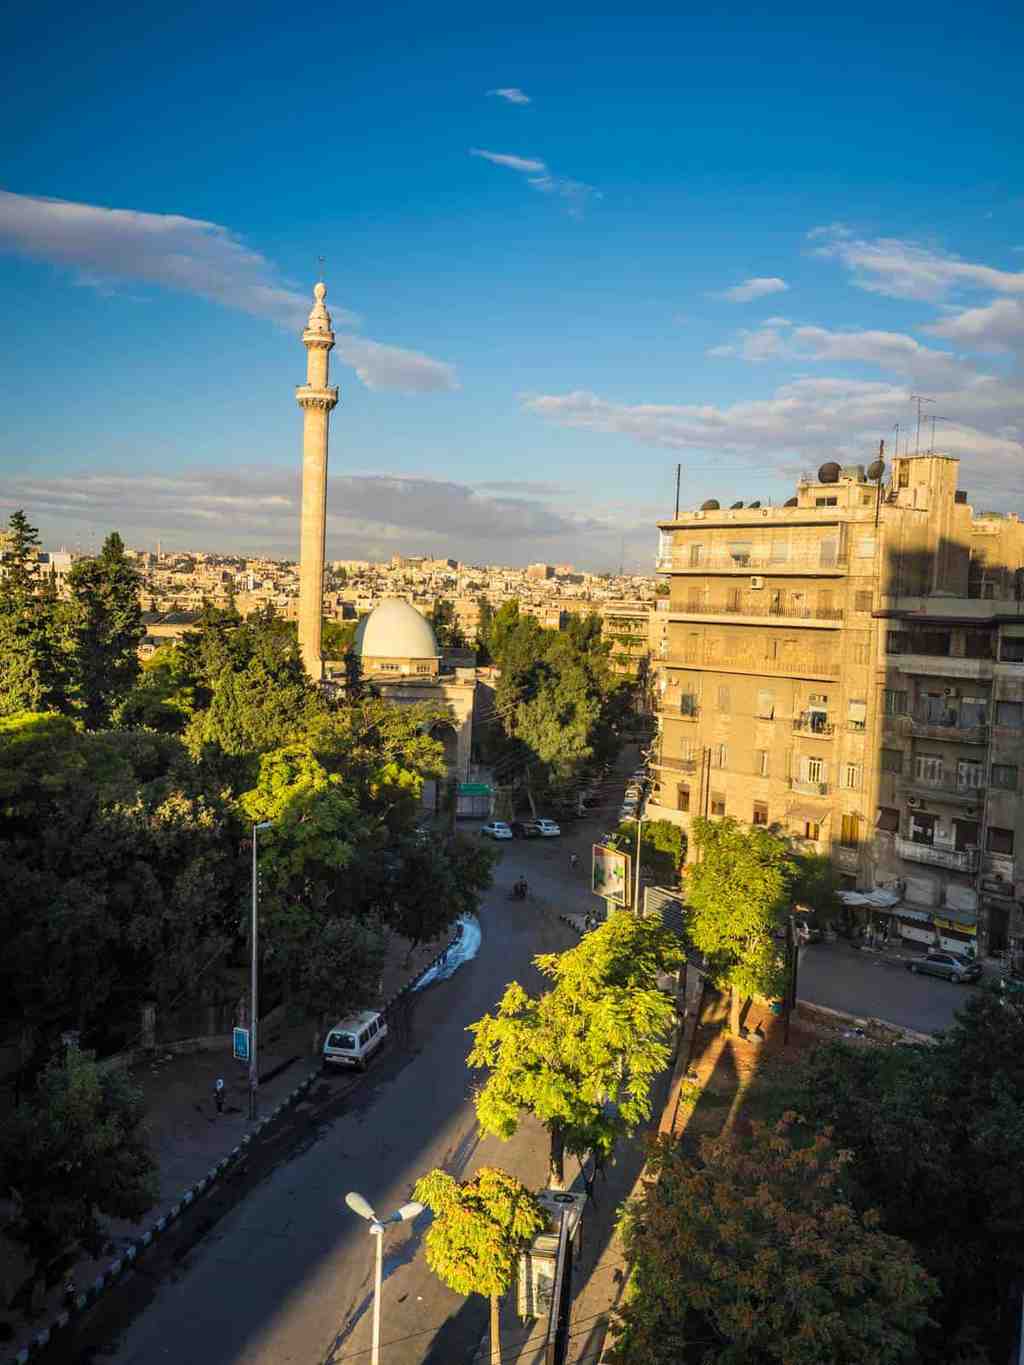 View from my hotel in Aleppo Syria